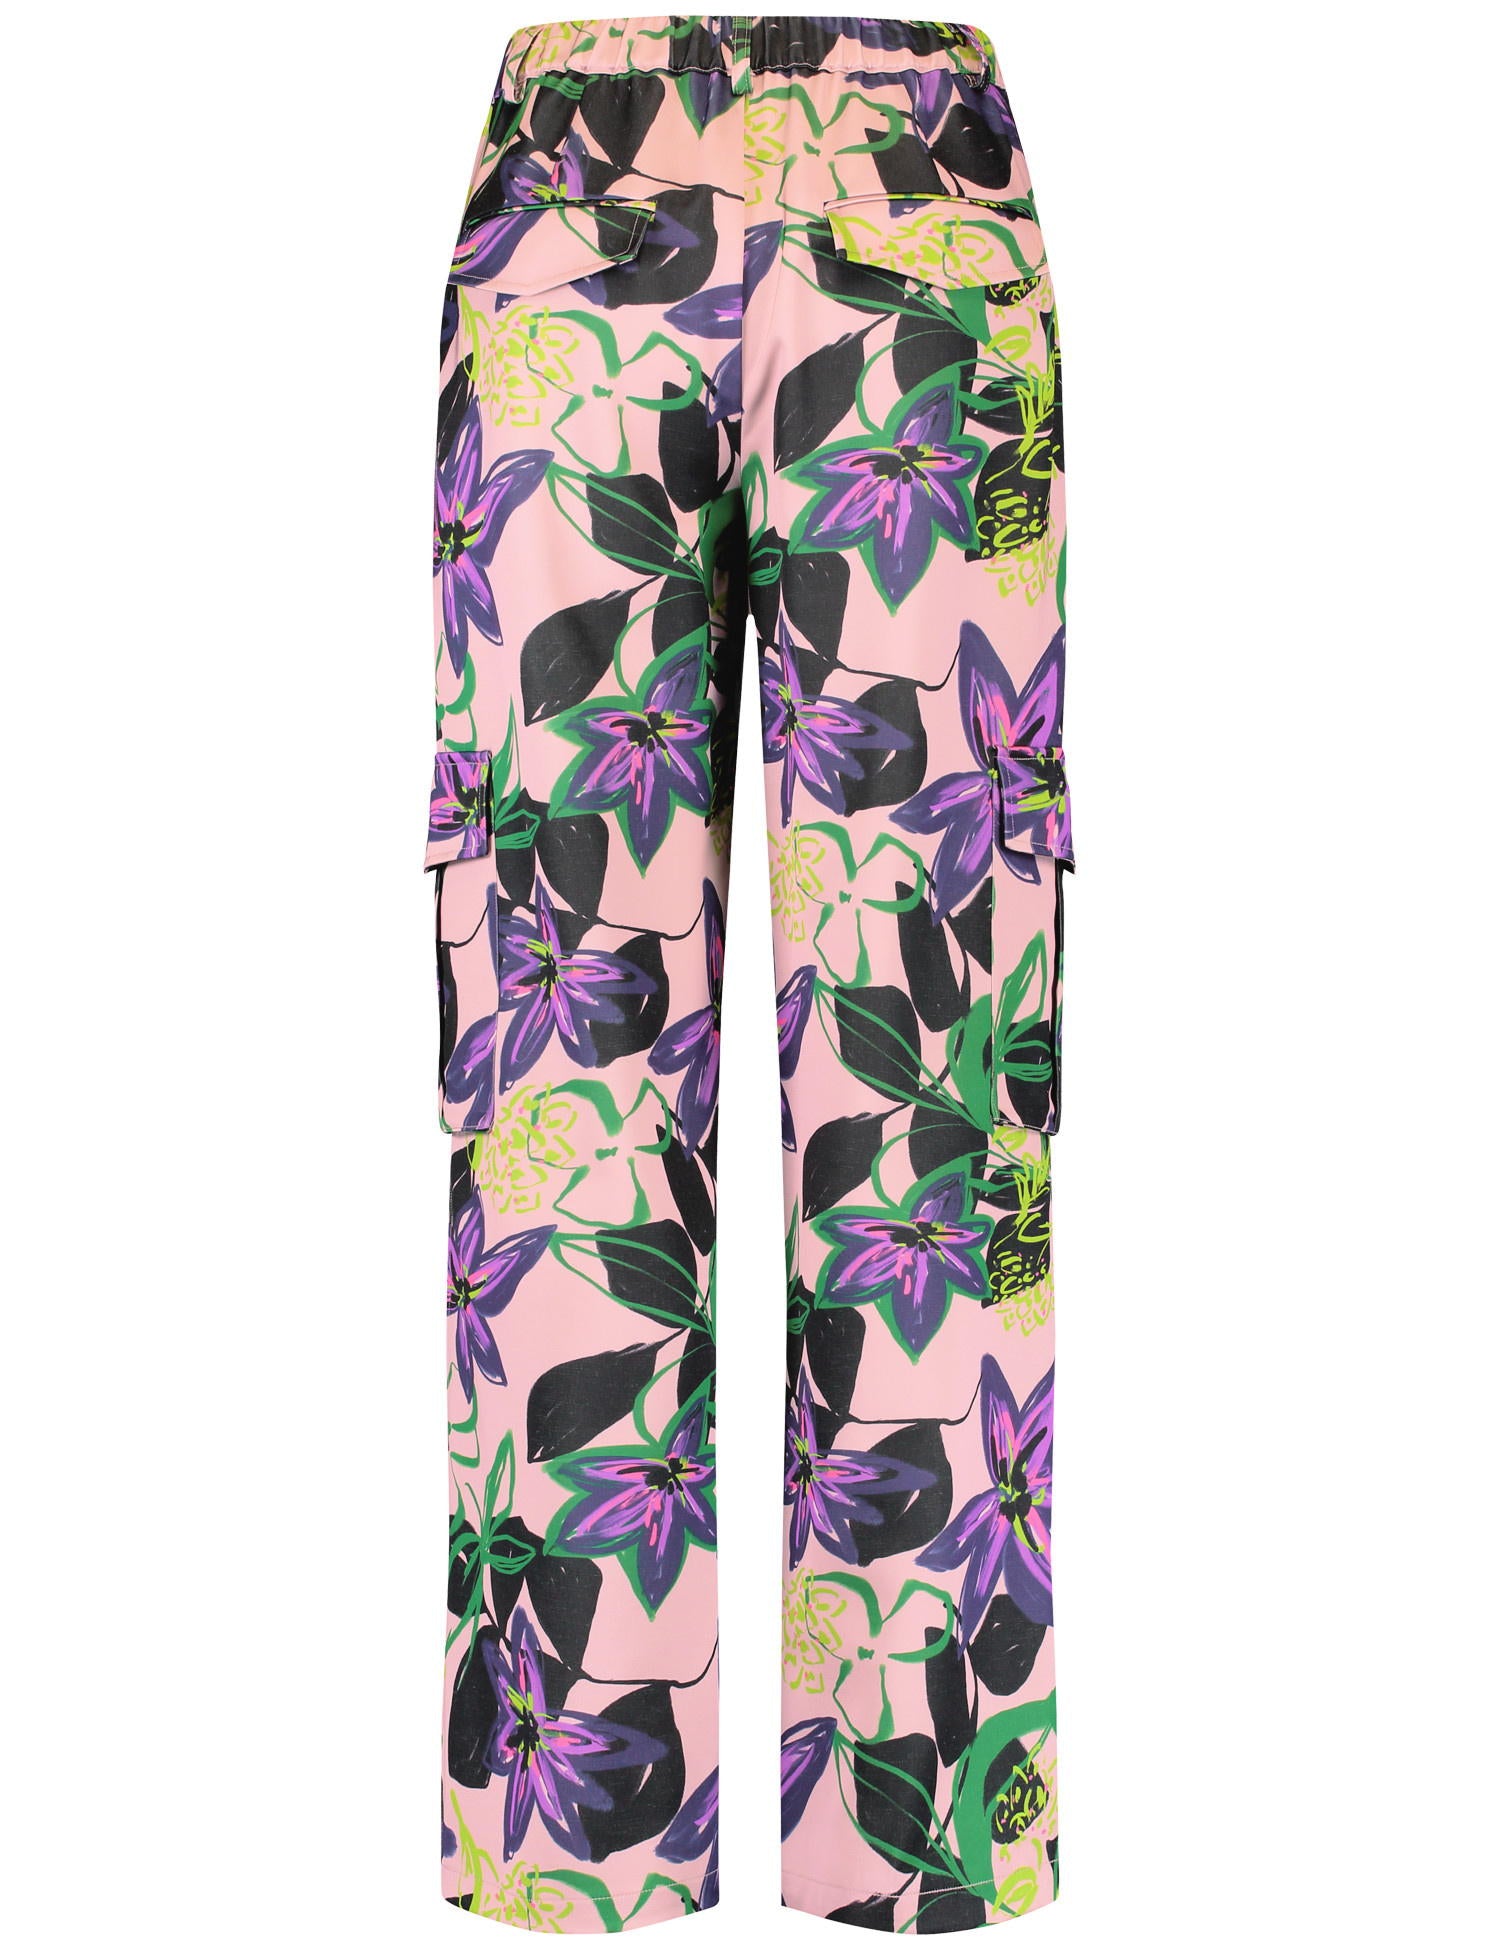 Cargo Trousers With A Floral Pattern_320015-31243_3058_03